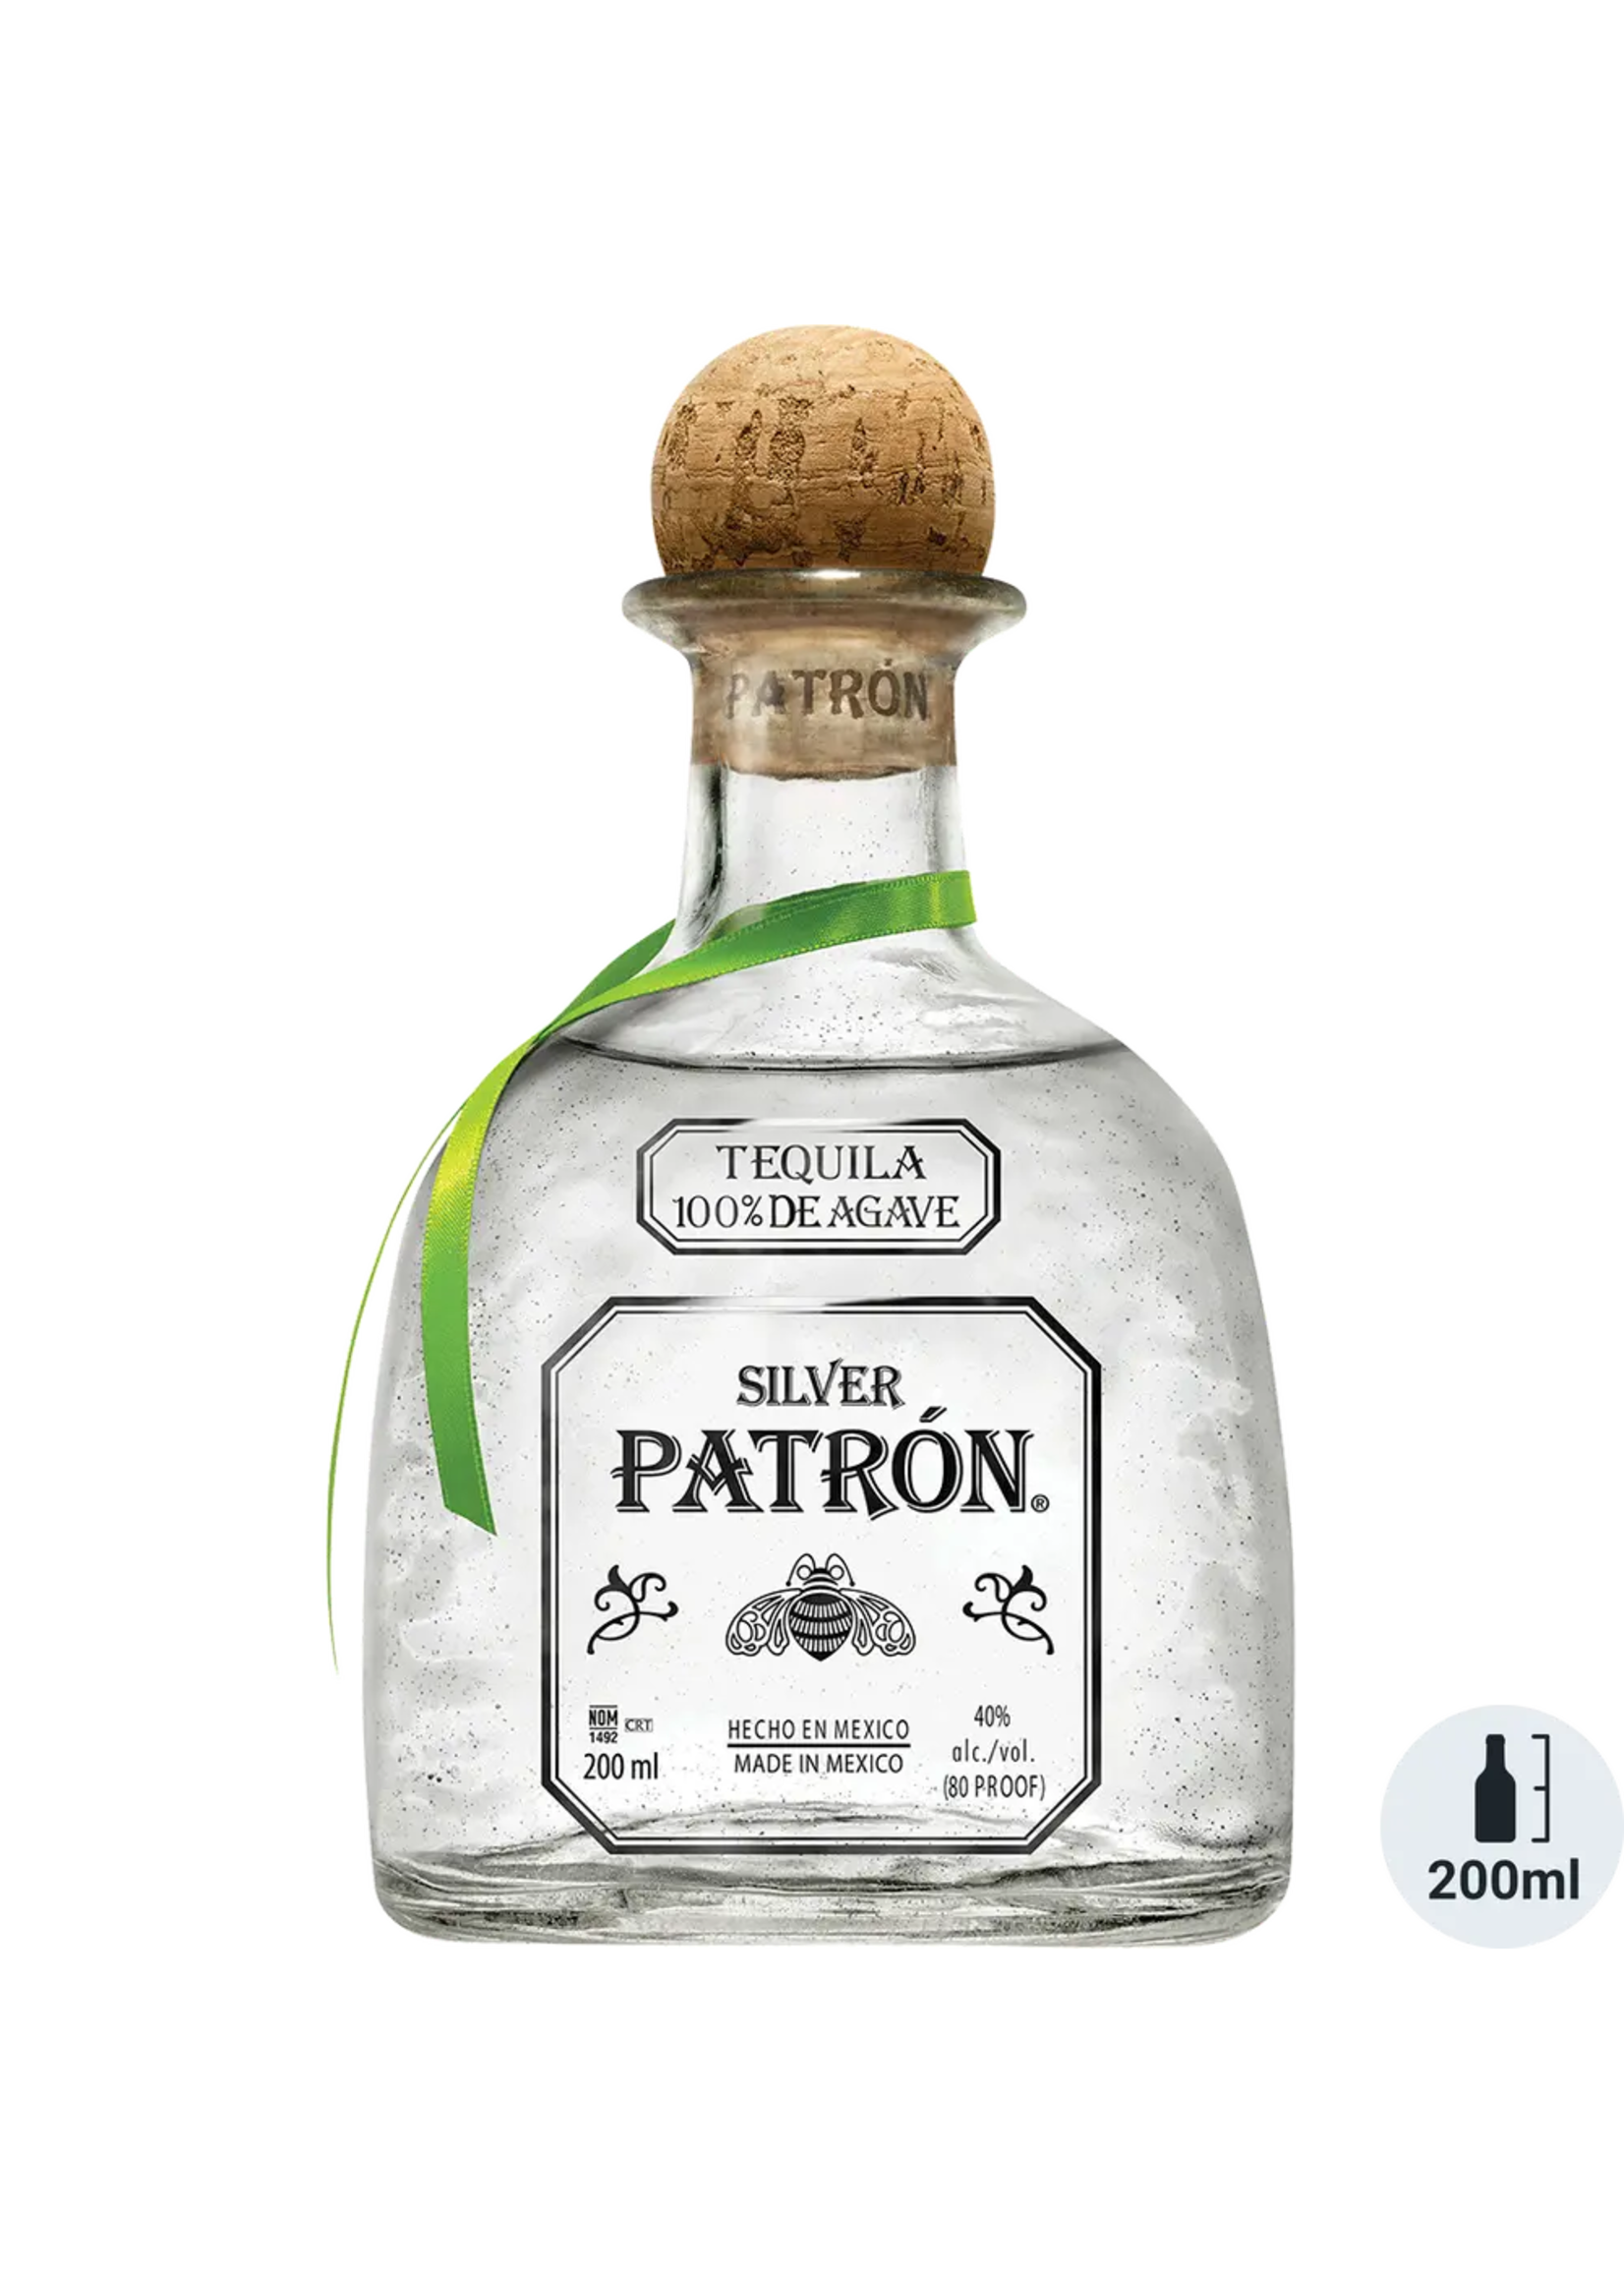 Patron Patron Silver Tequila 80Proof 200ml